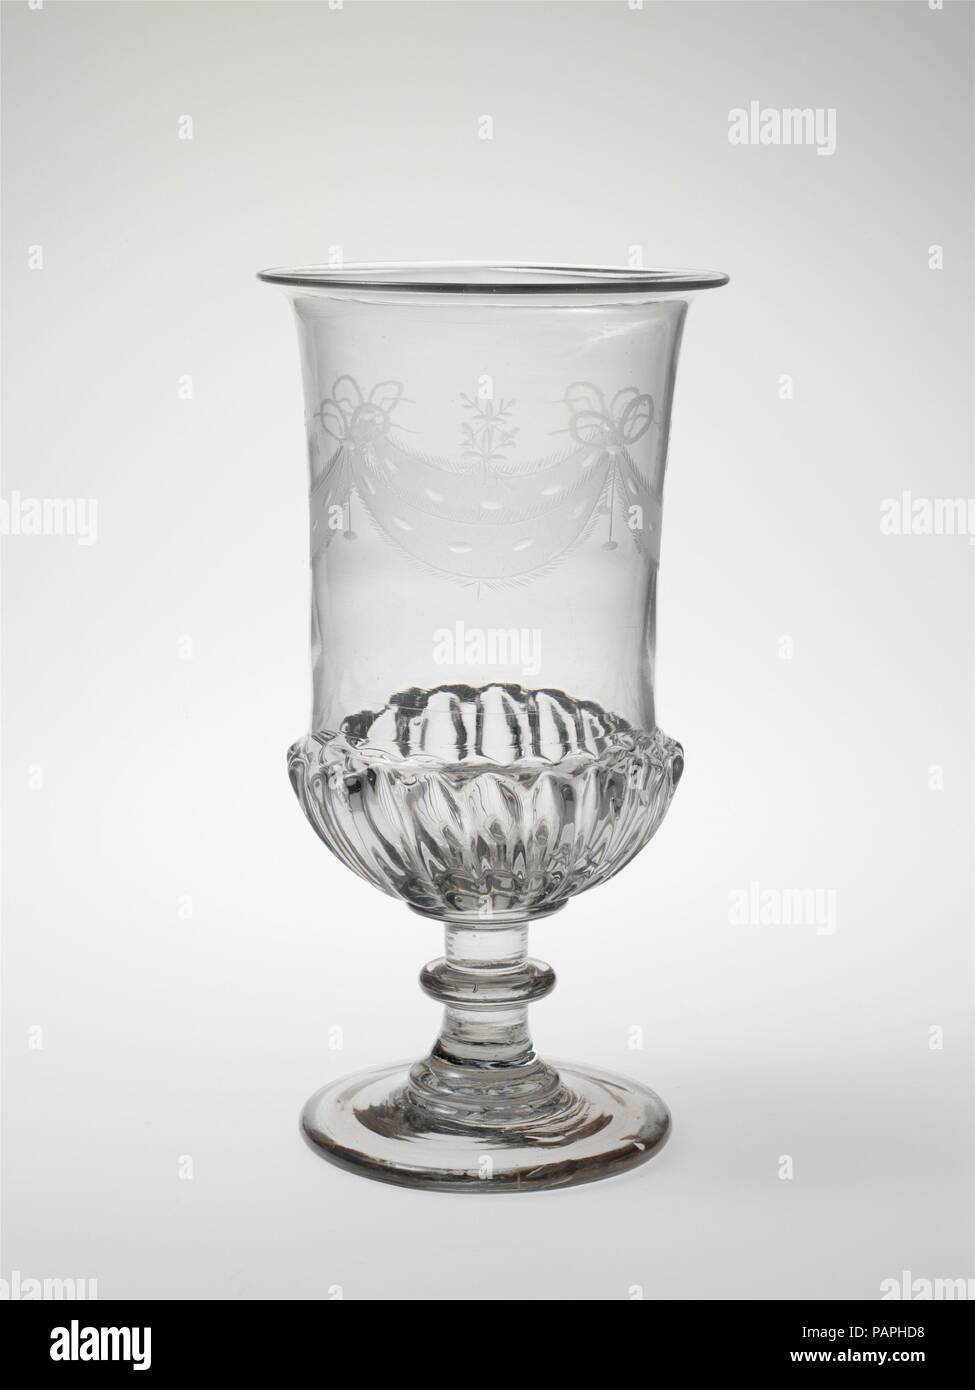 Celery vase. Culture: American. Dimensions: H. 9 in. (22.9 cm); Diam. 3 7/8 in. (9.8 cm). Maker: Bakewell, Page & Bakewell (1808-1882); Possibly Benjamin Bakewell & Co. (1809-1813) or. Date: 1810-20.  The molded fluting around the base of the vase may reference gadrooning on silver vessels of the seventeenth and eighteenth centuries. Museum: Metropolitan Museum of Art, New York, USA. Stock Photo